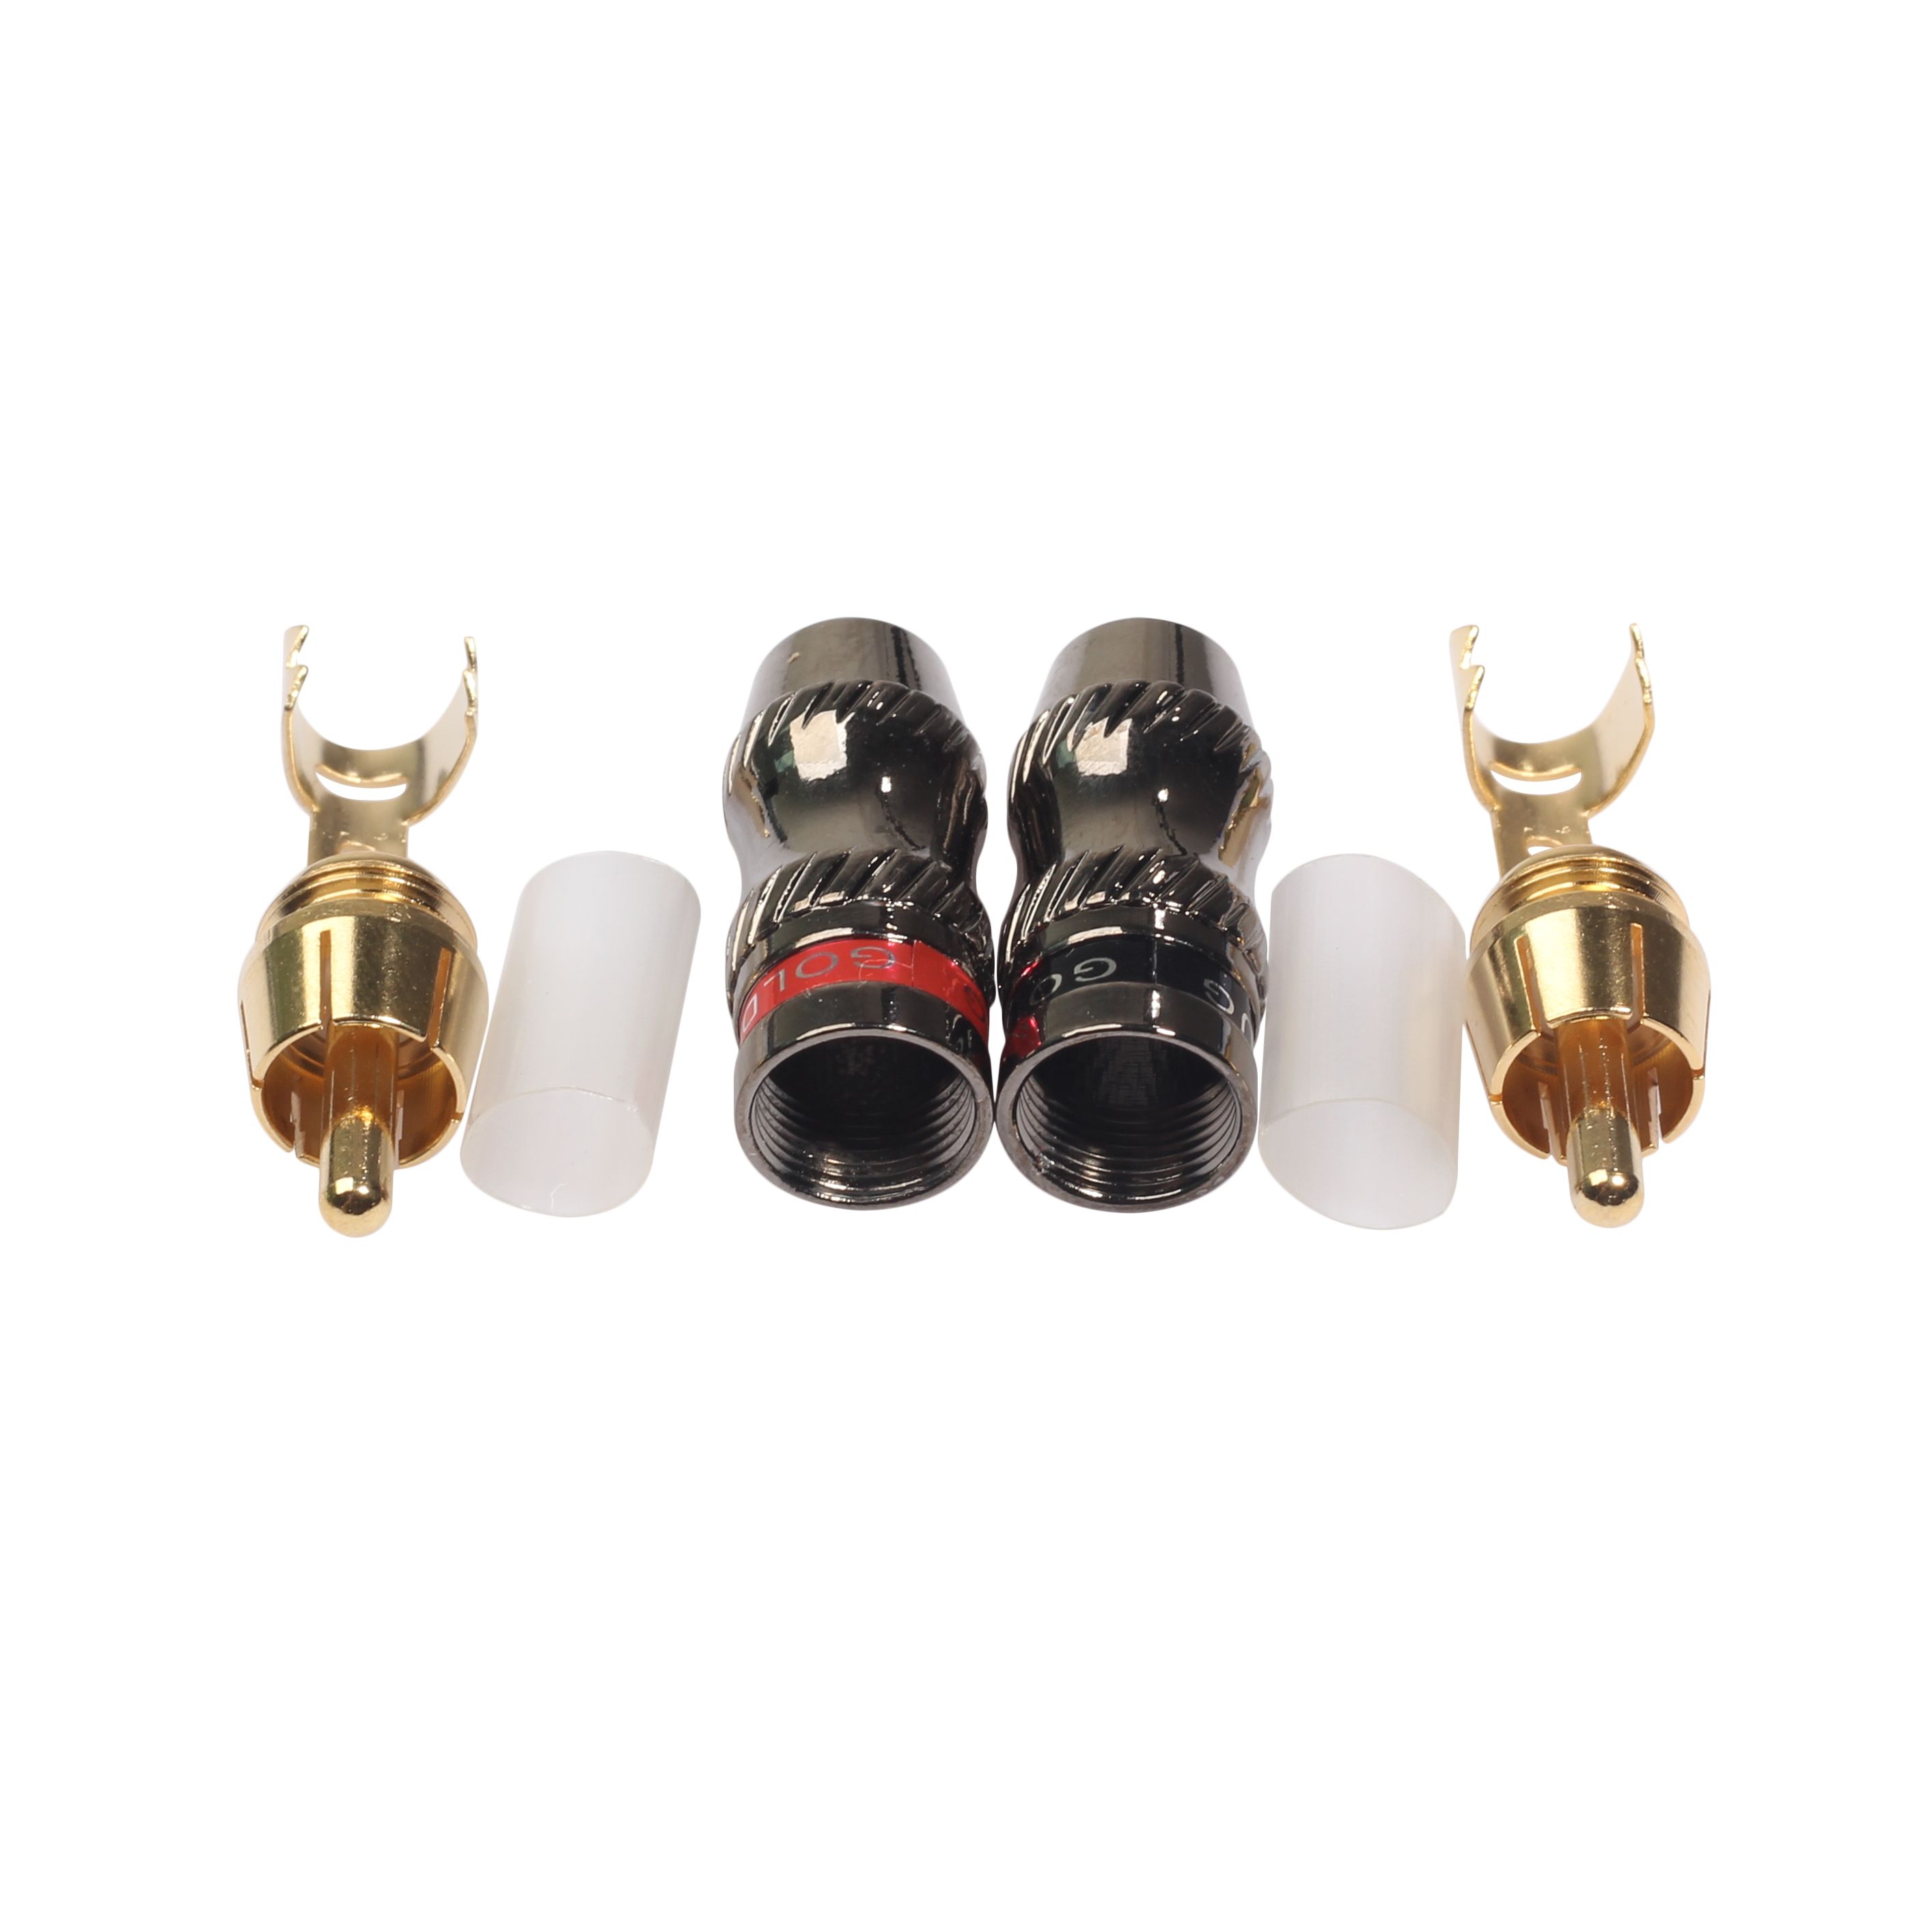 REXLIS-Gold-Plated-RCA-Male-Soldering-Plug-TR026-HIFI-Audio-Cable-RCA-Male-Video--Audio-Connector-Fo-1526964